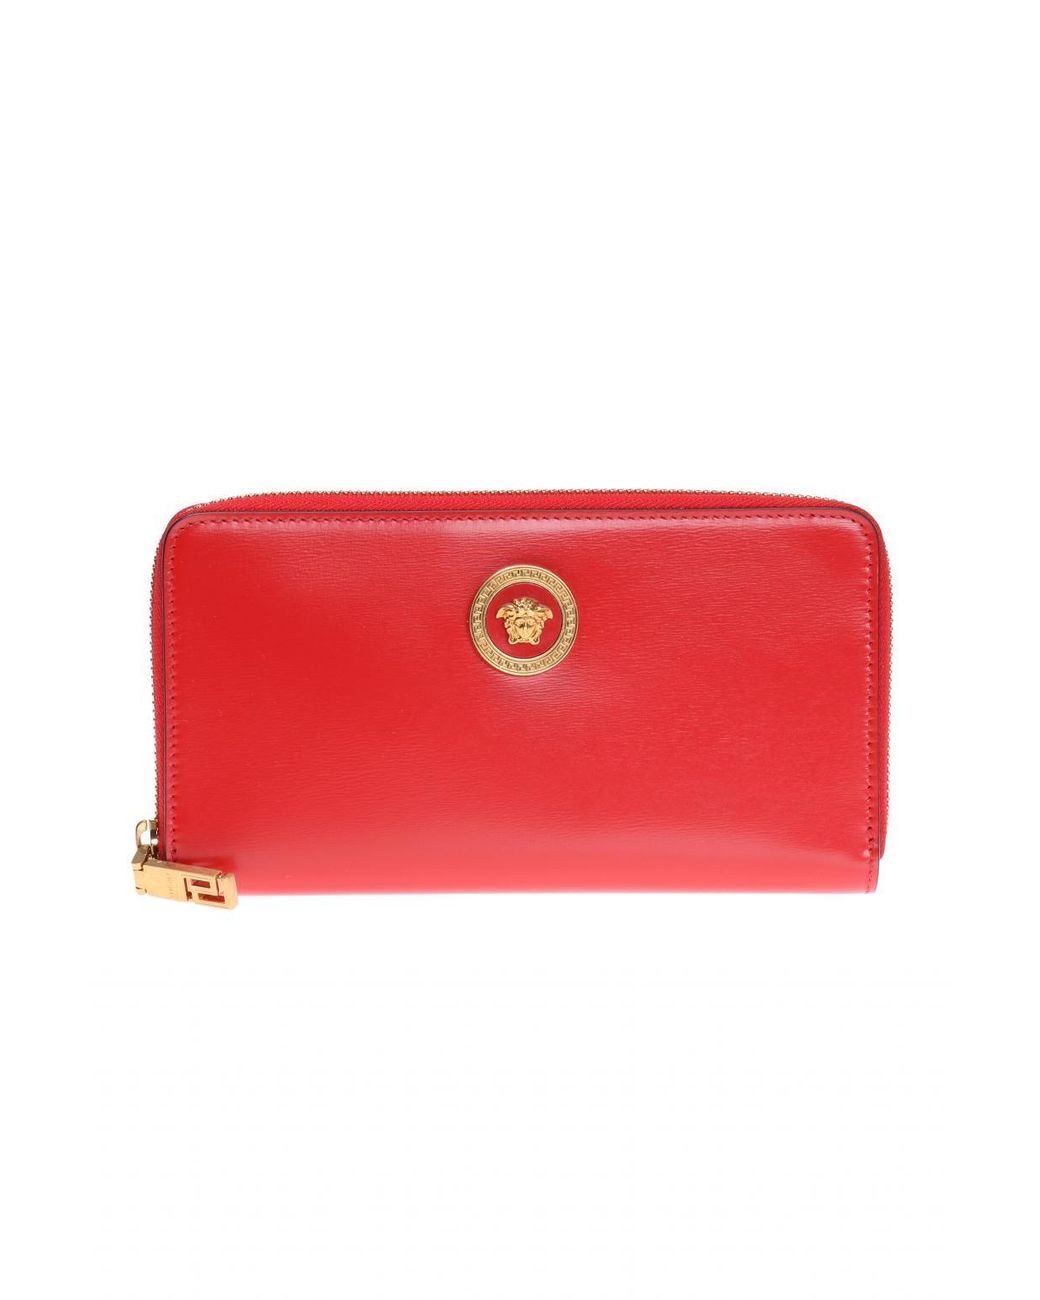 Versace Wallet With Metal Logo in Red - Lyst